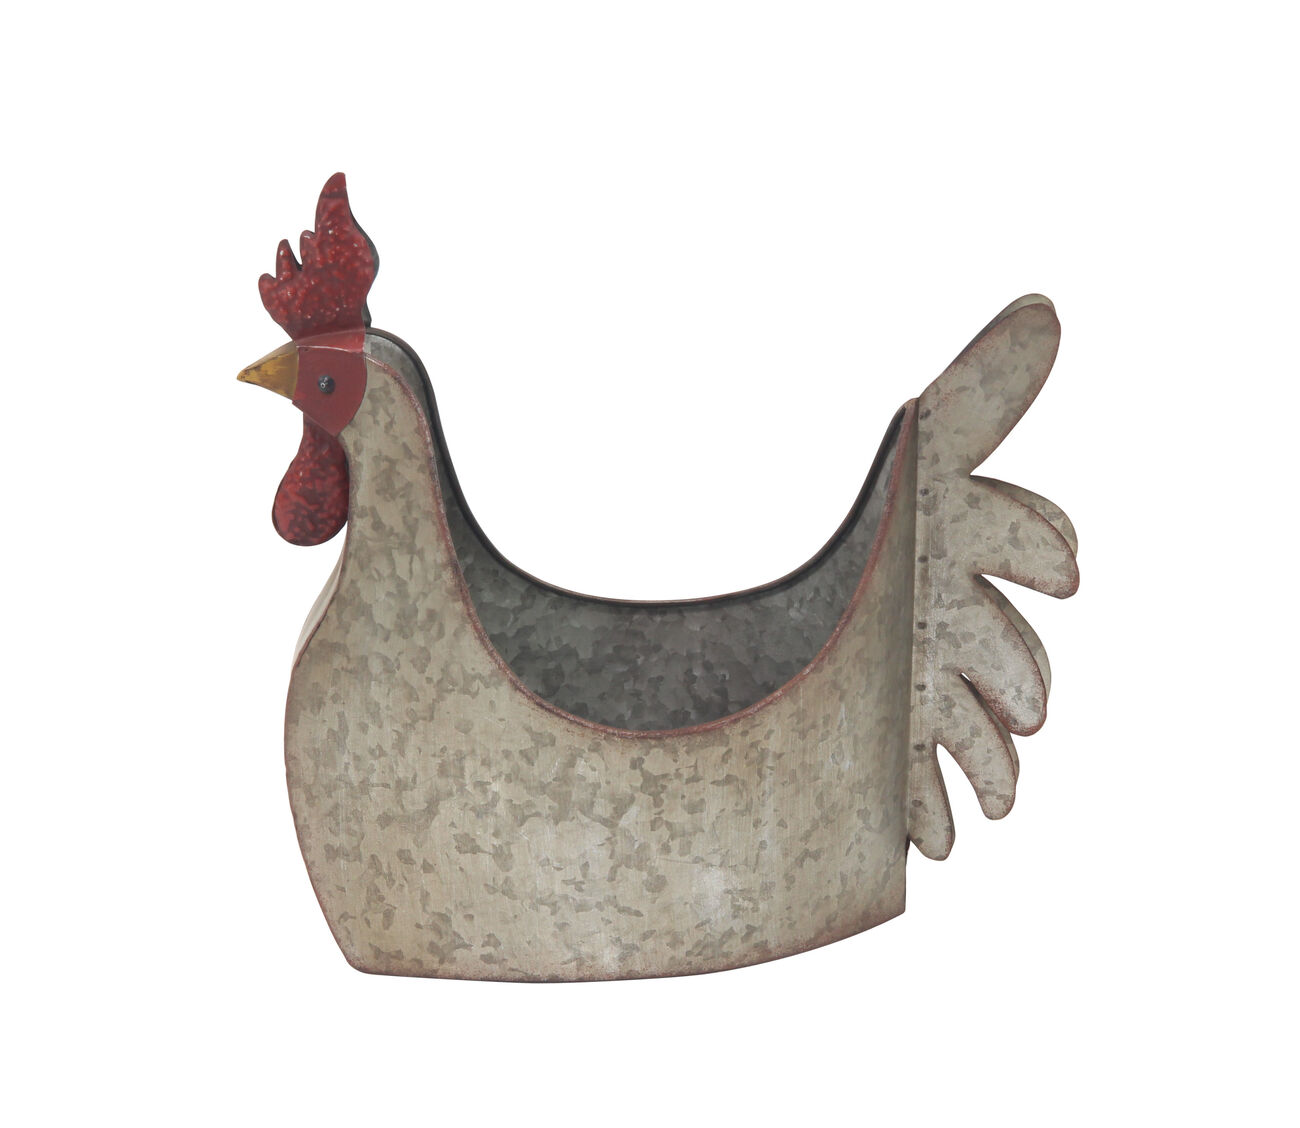 Metal Chicken Design Planter with Beak and Tail, Weathered Gray